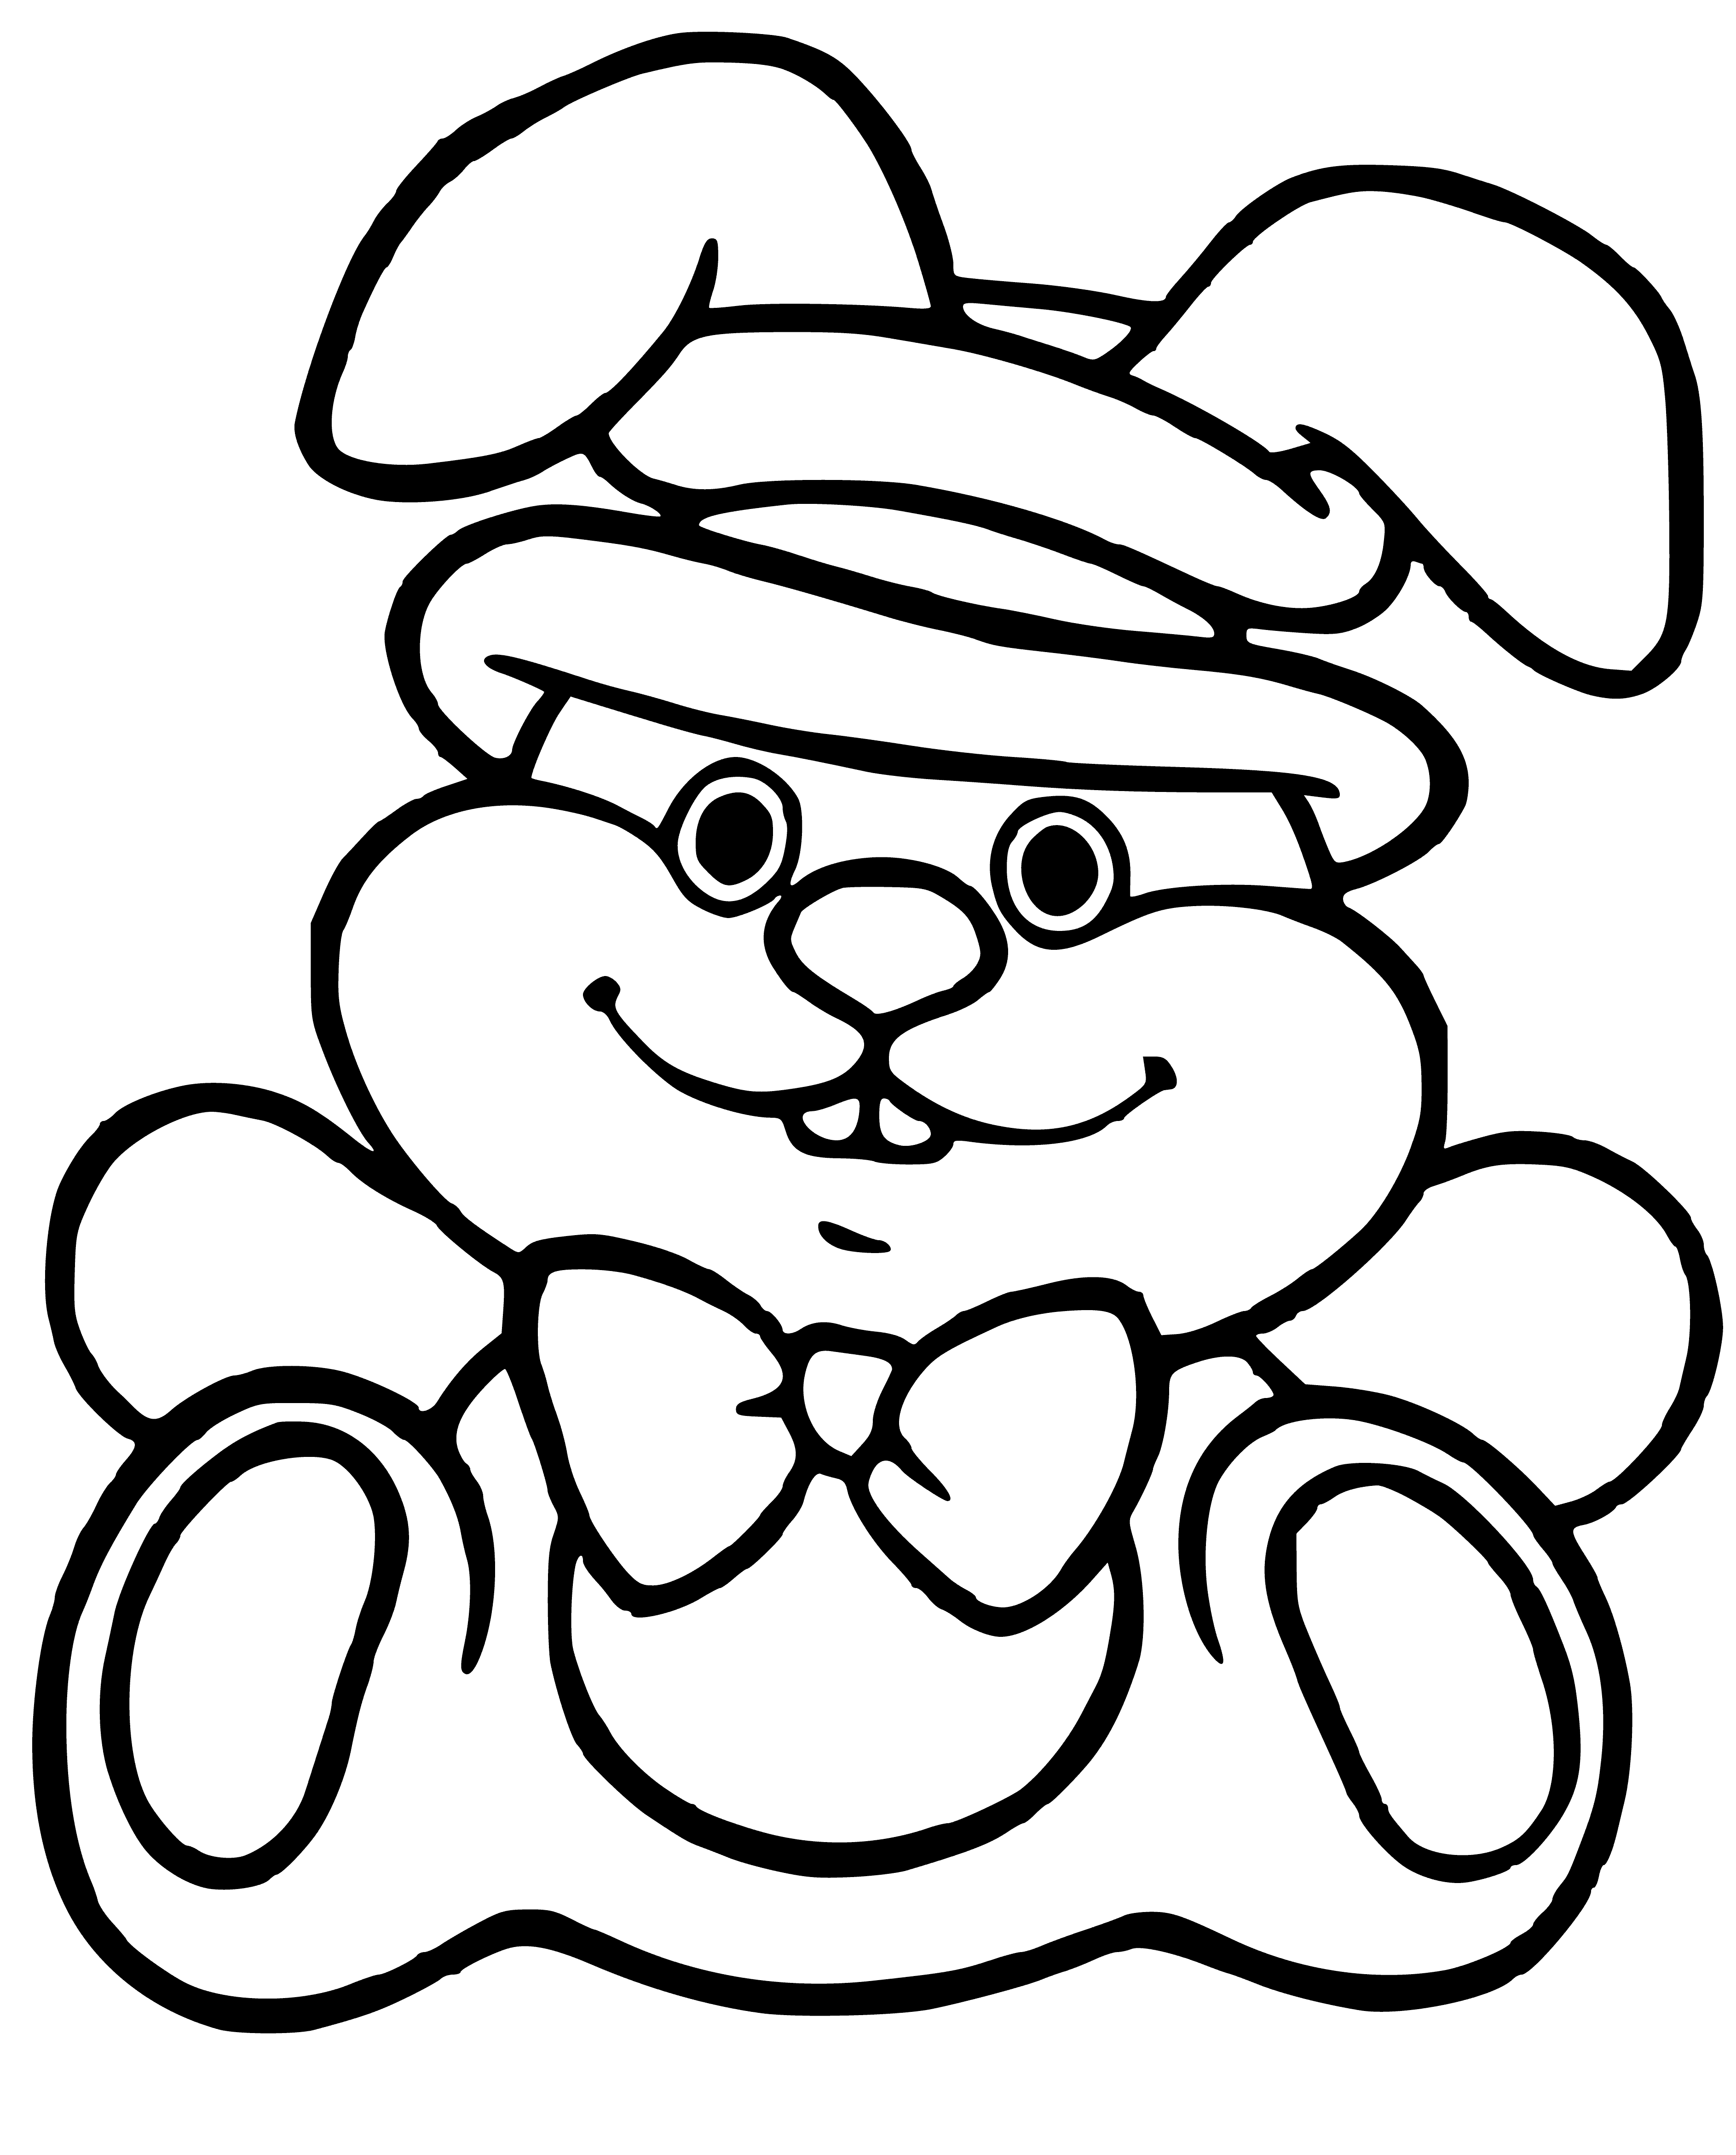 coloring page: Small, brown bunny w/ white fur, long floppy ears, pink nose, eyes closed, lying on green grass.